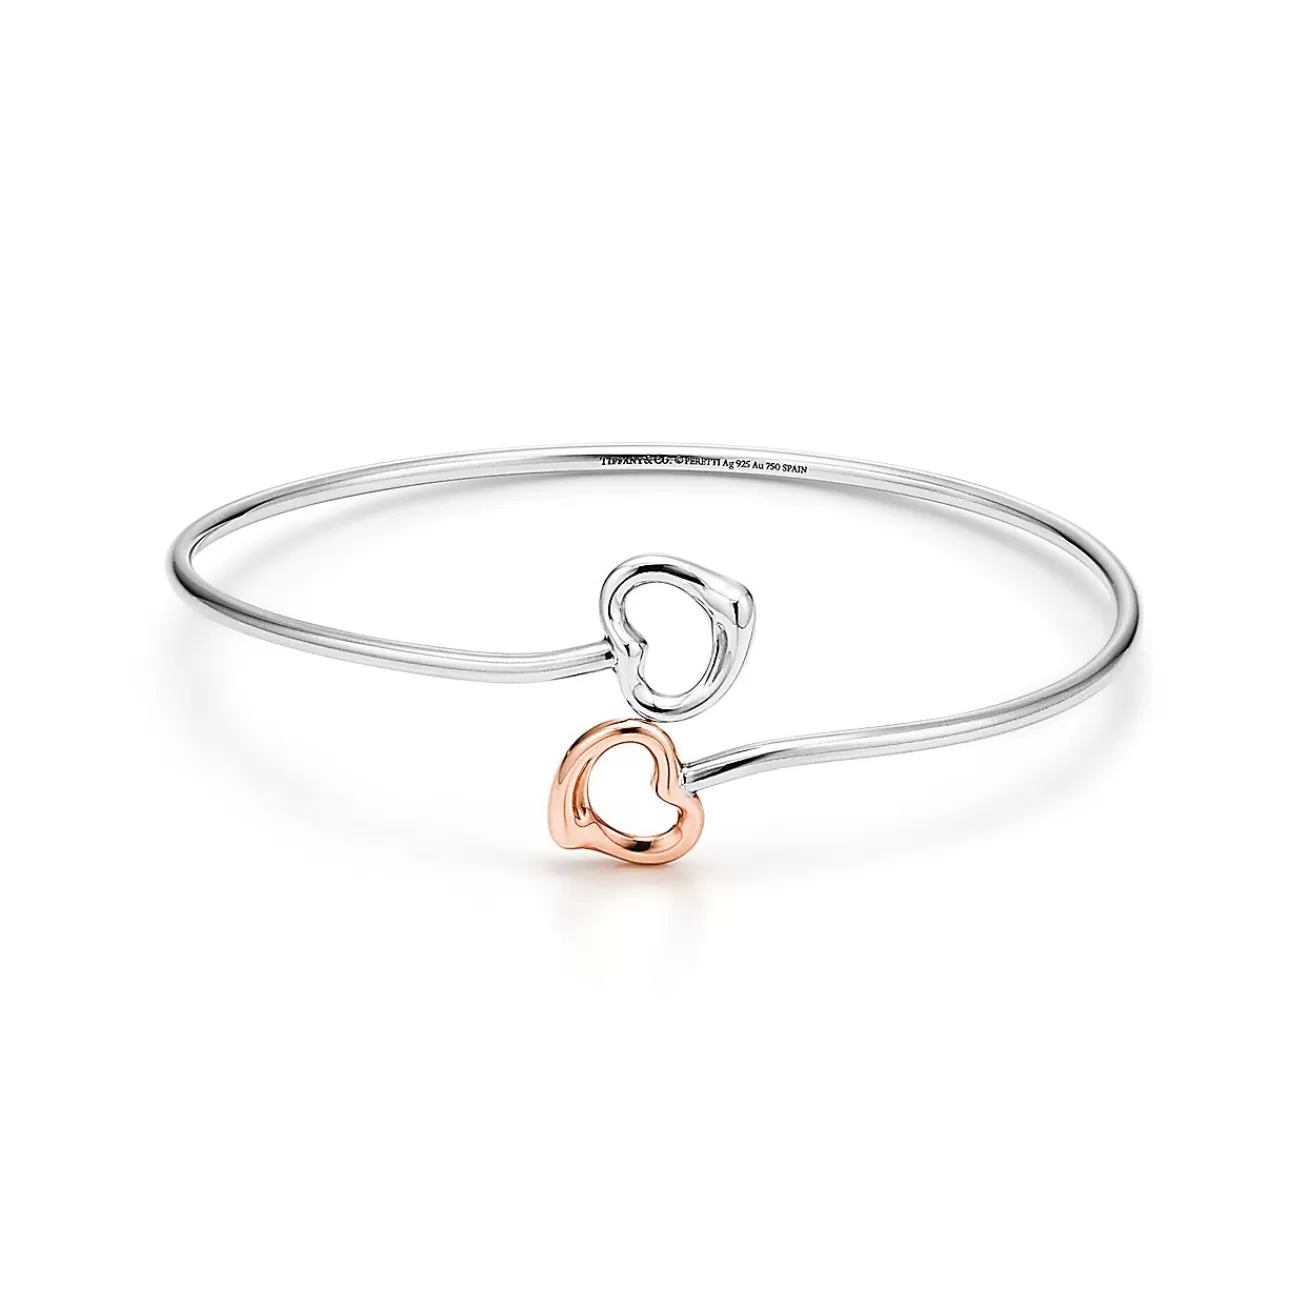 Tiffany & Co. Elsa Peretti® Double Open Heart bangle in silver and 18k rose gold, medium. | ^ Bracelets | Rose Gold Jewelry